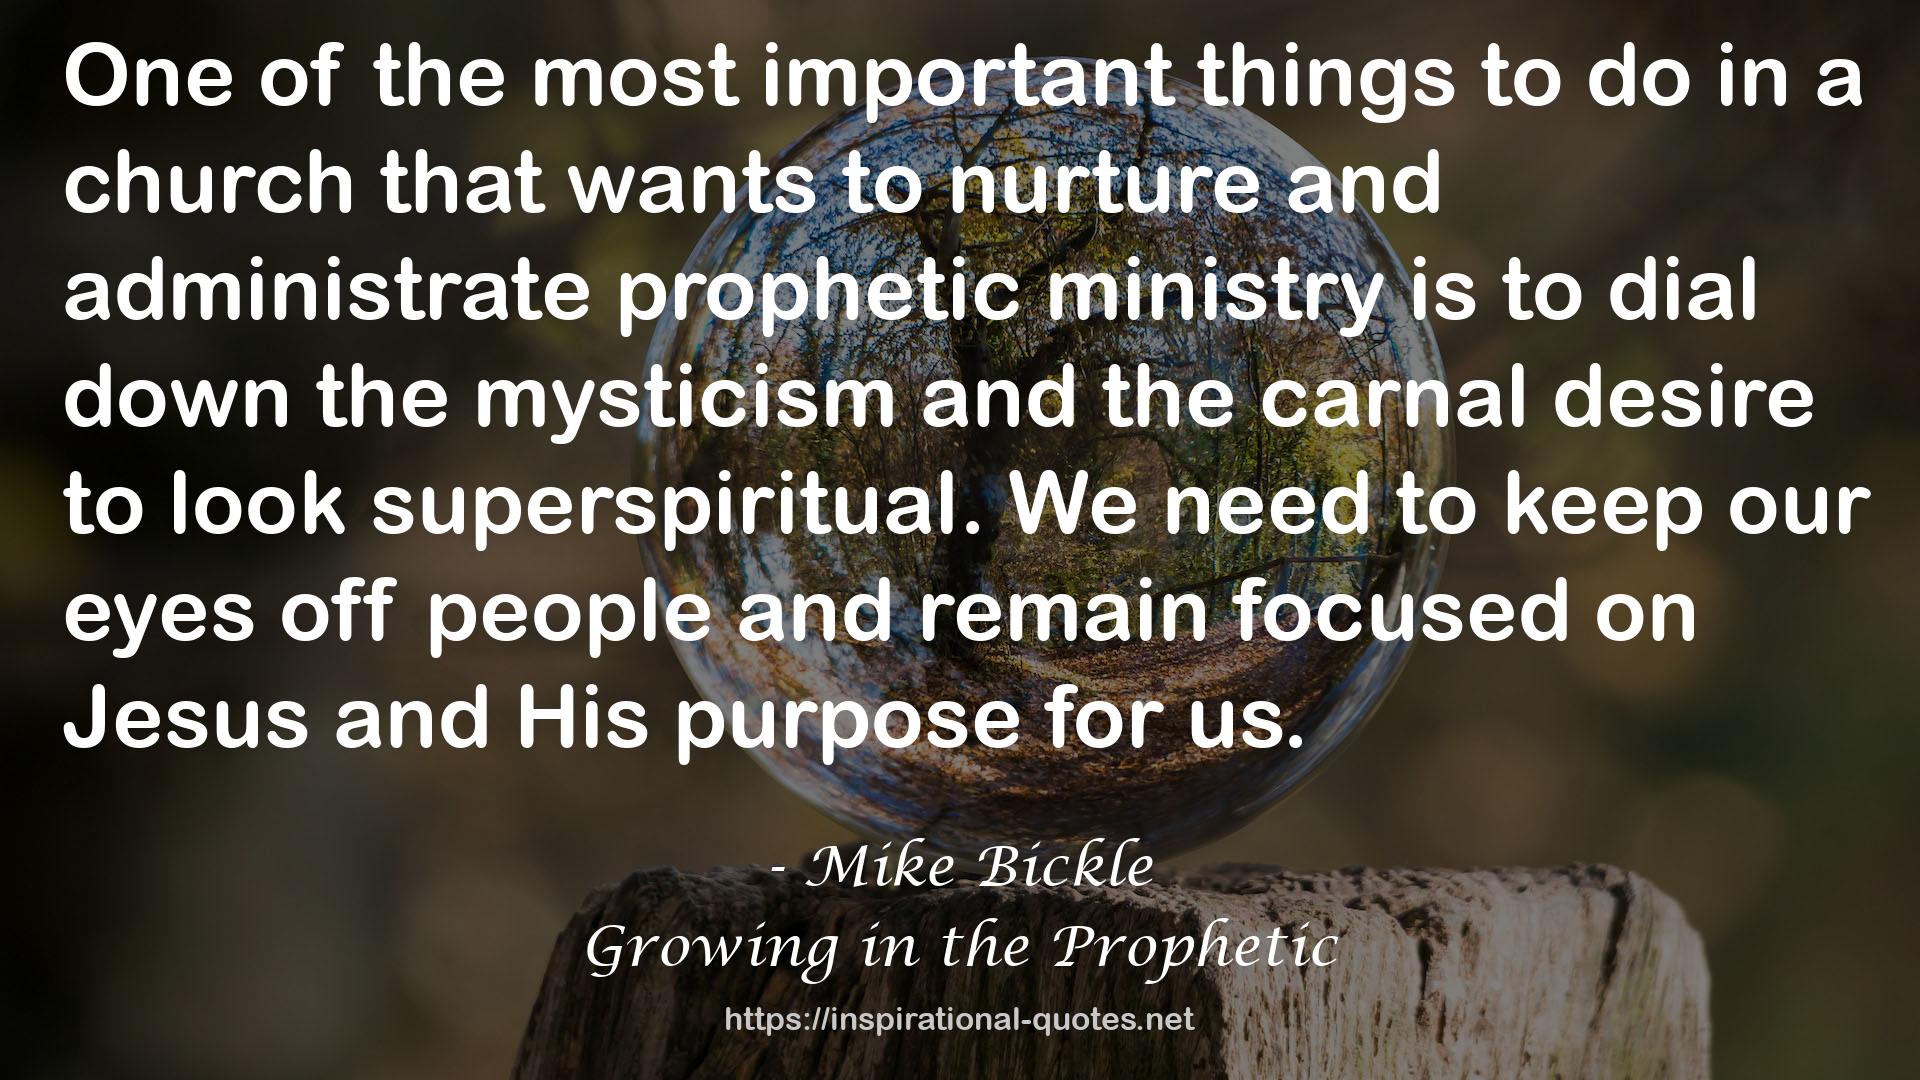 Mike Bickle QUOTES